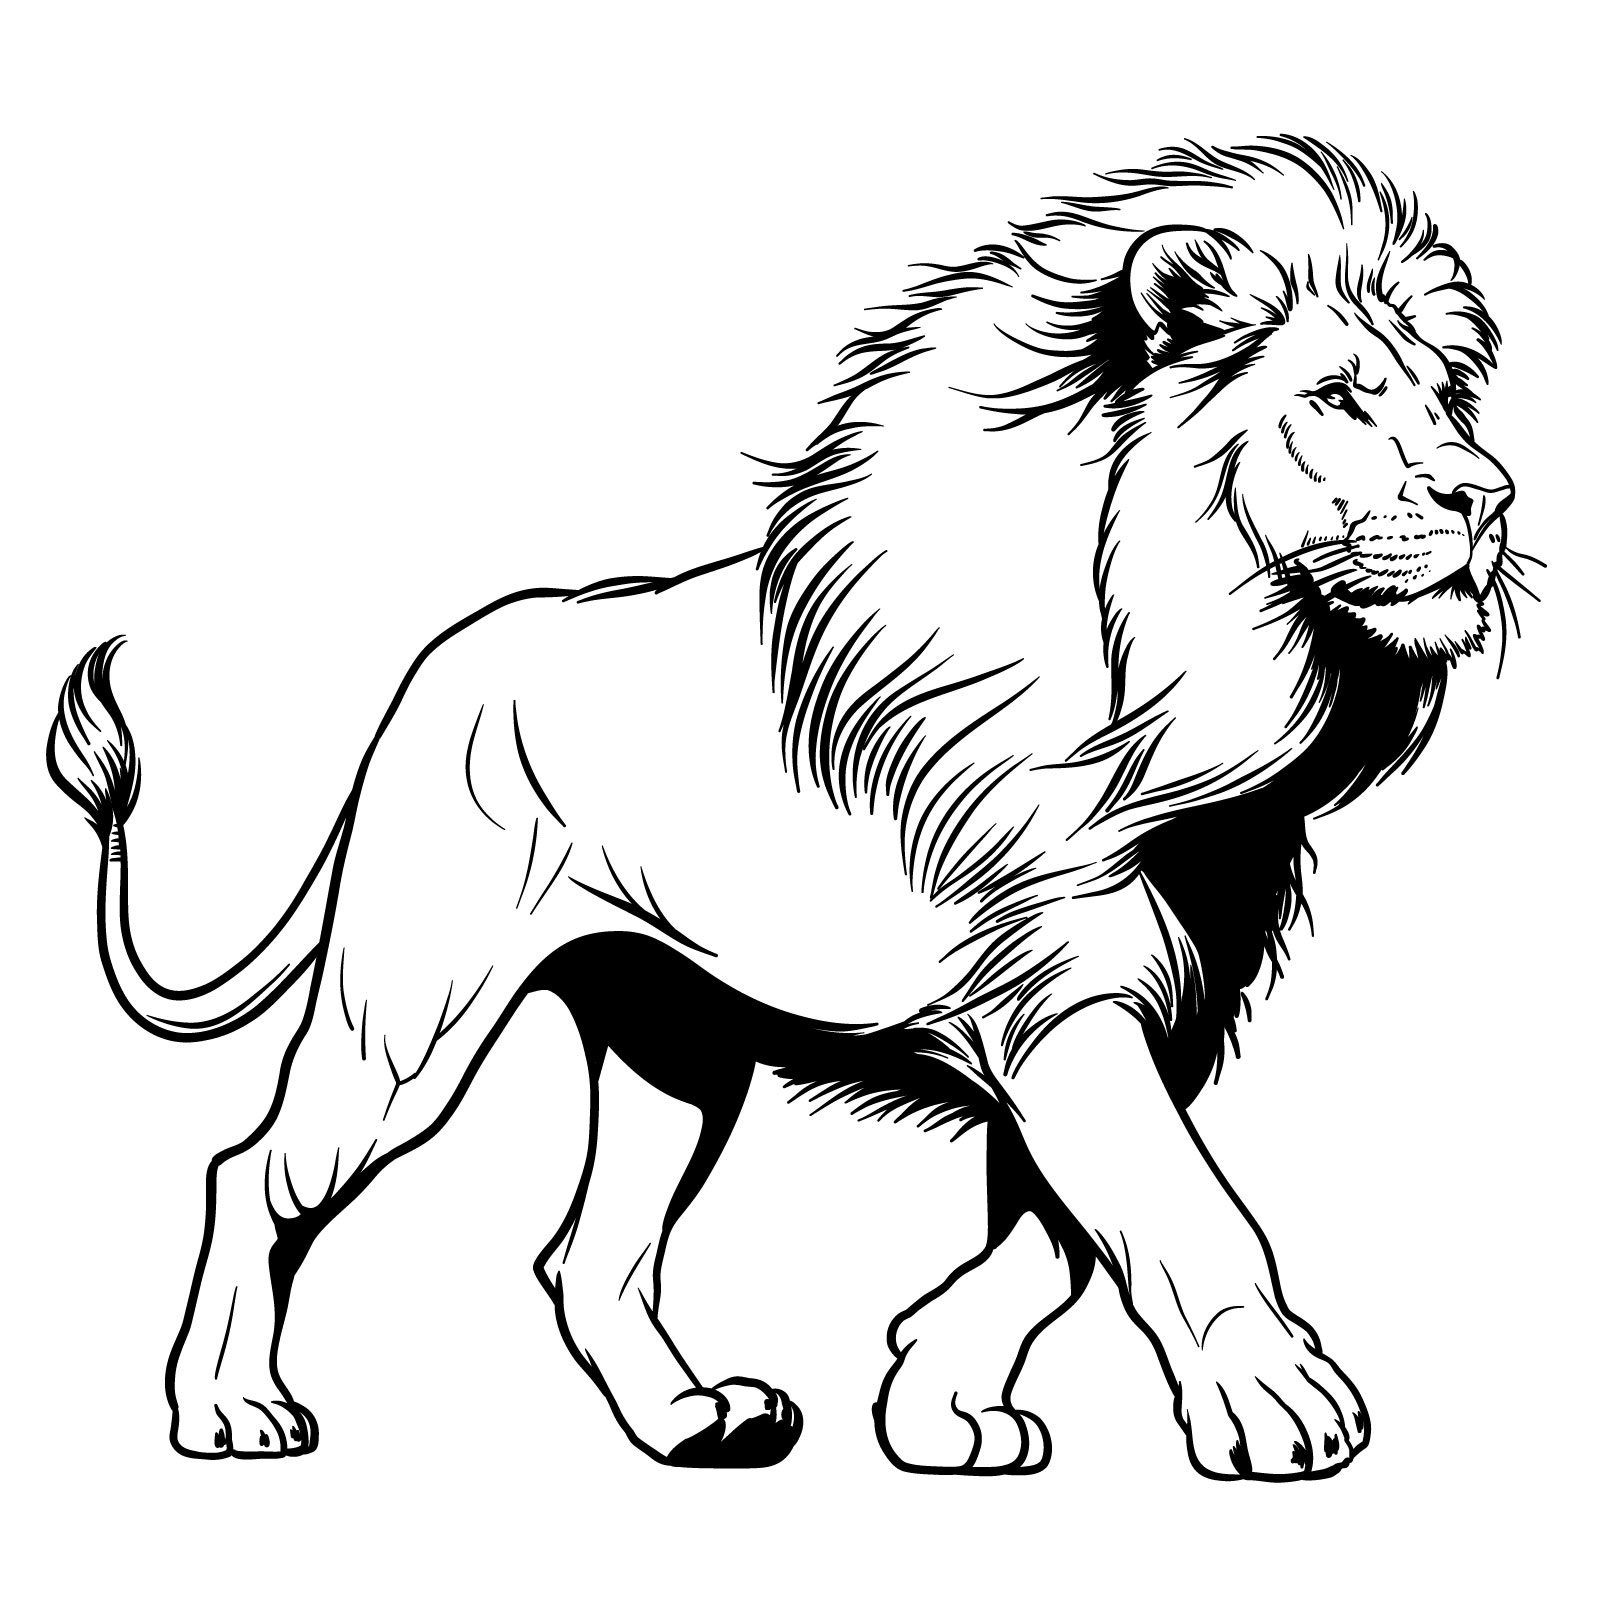 A step-by-step guide on how to draw a walking lion in 3/4 view